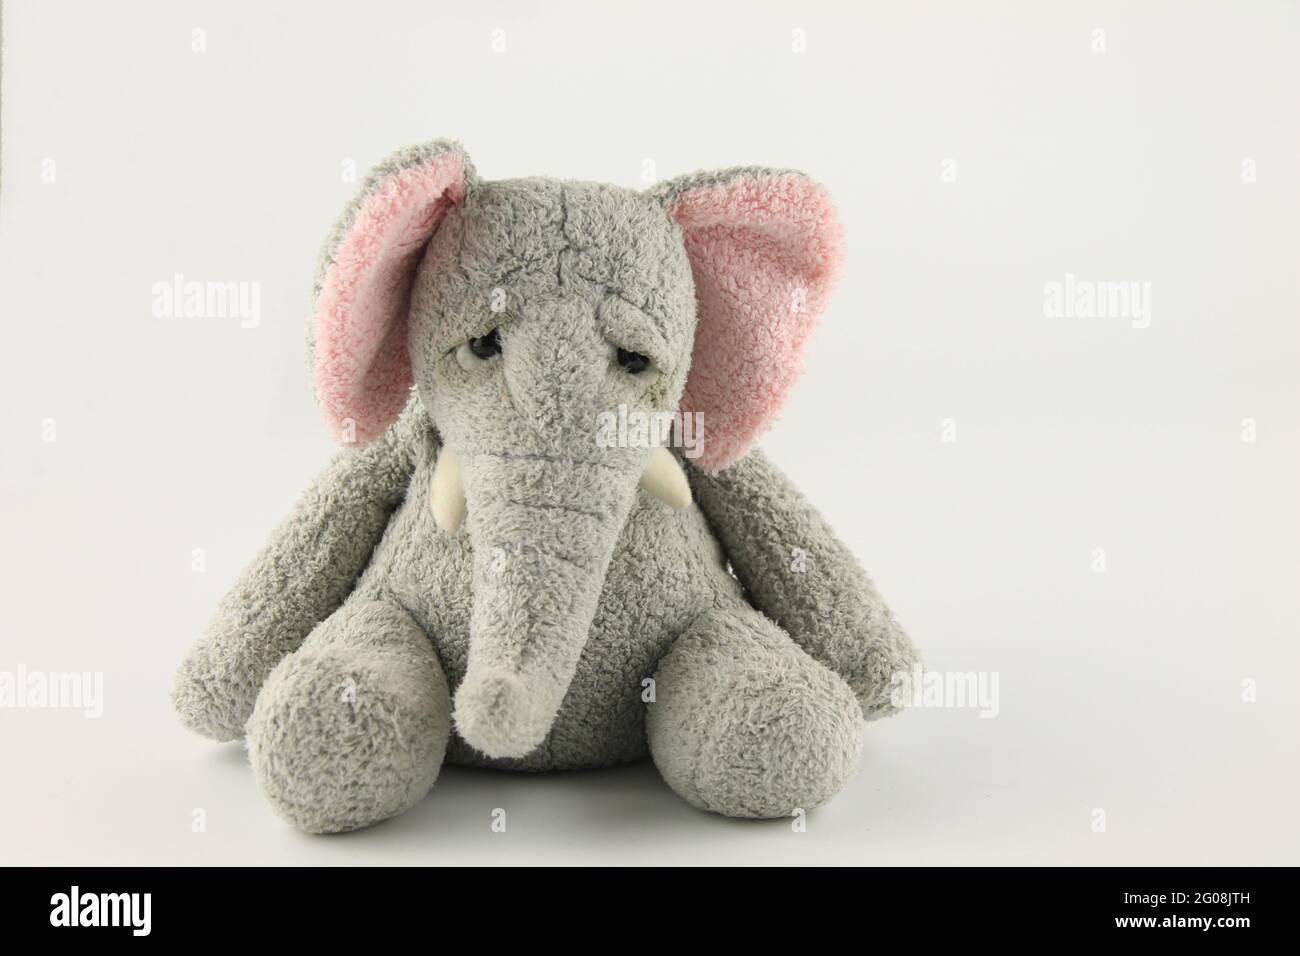 soft toy elephant sitting down with a sad expression, isolated on white background with copy space Stock Photo